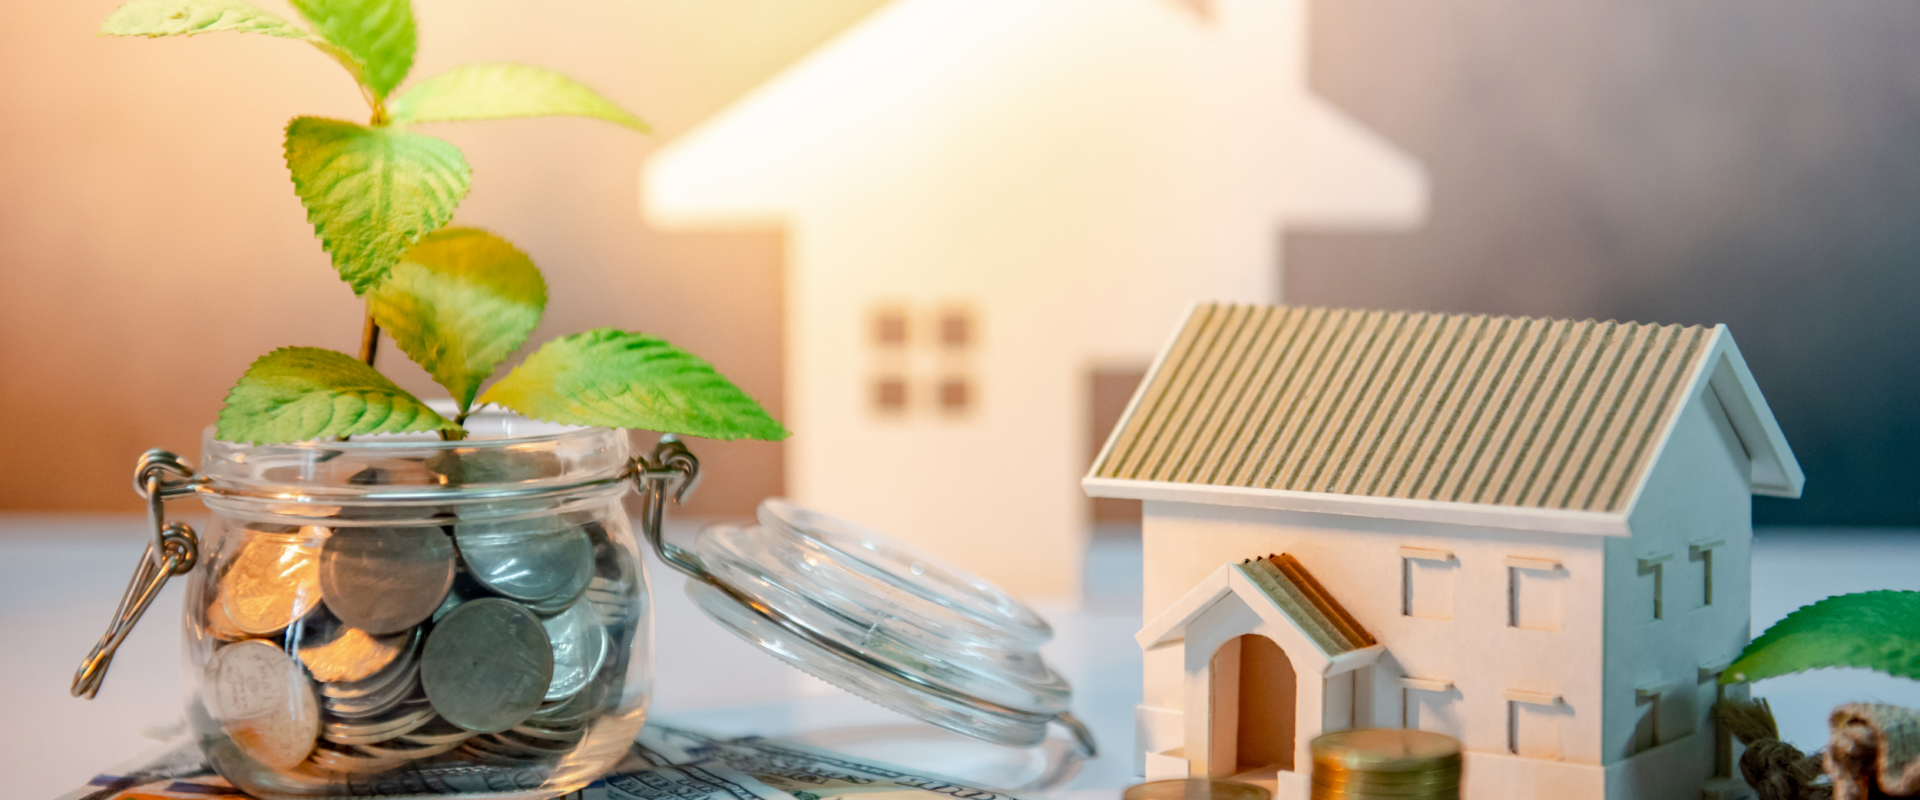 Saving money on Akron home sales with coins, house models, and growing plant representing financial growth.